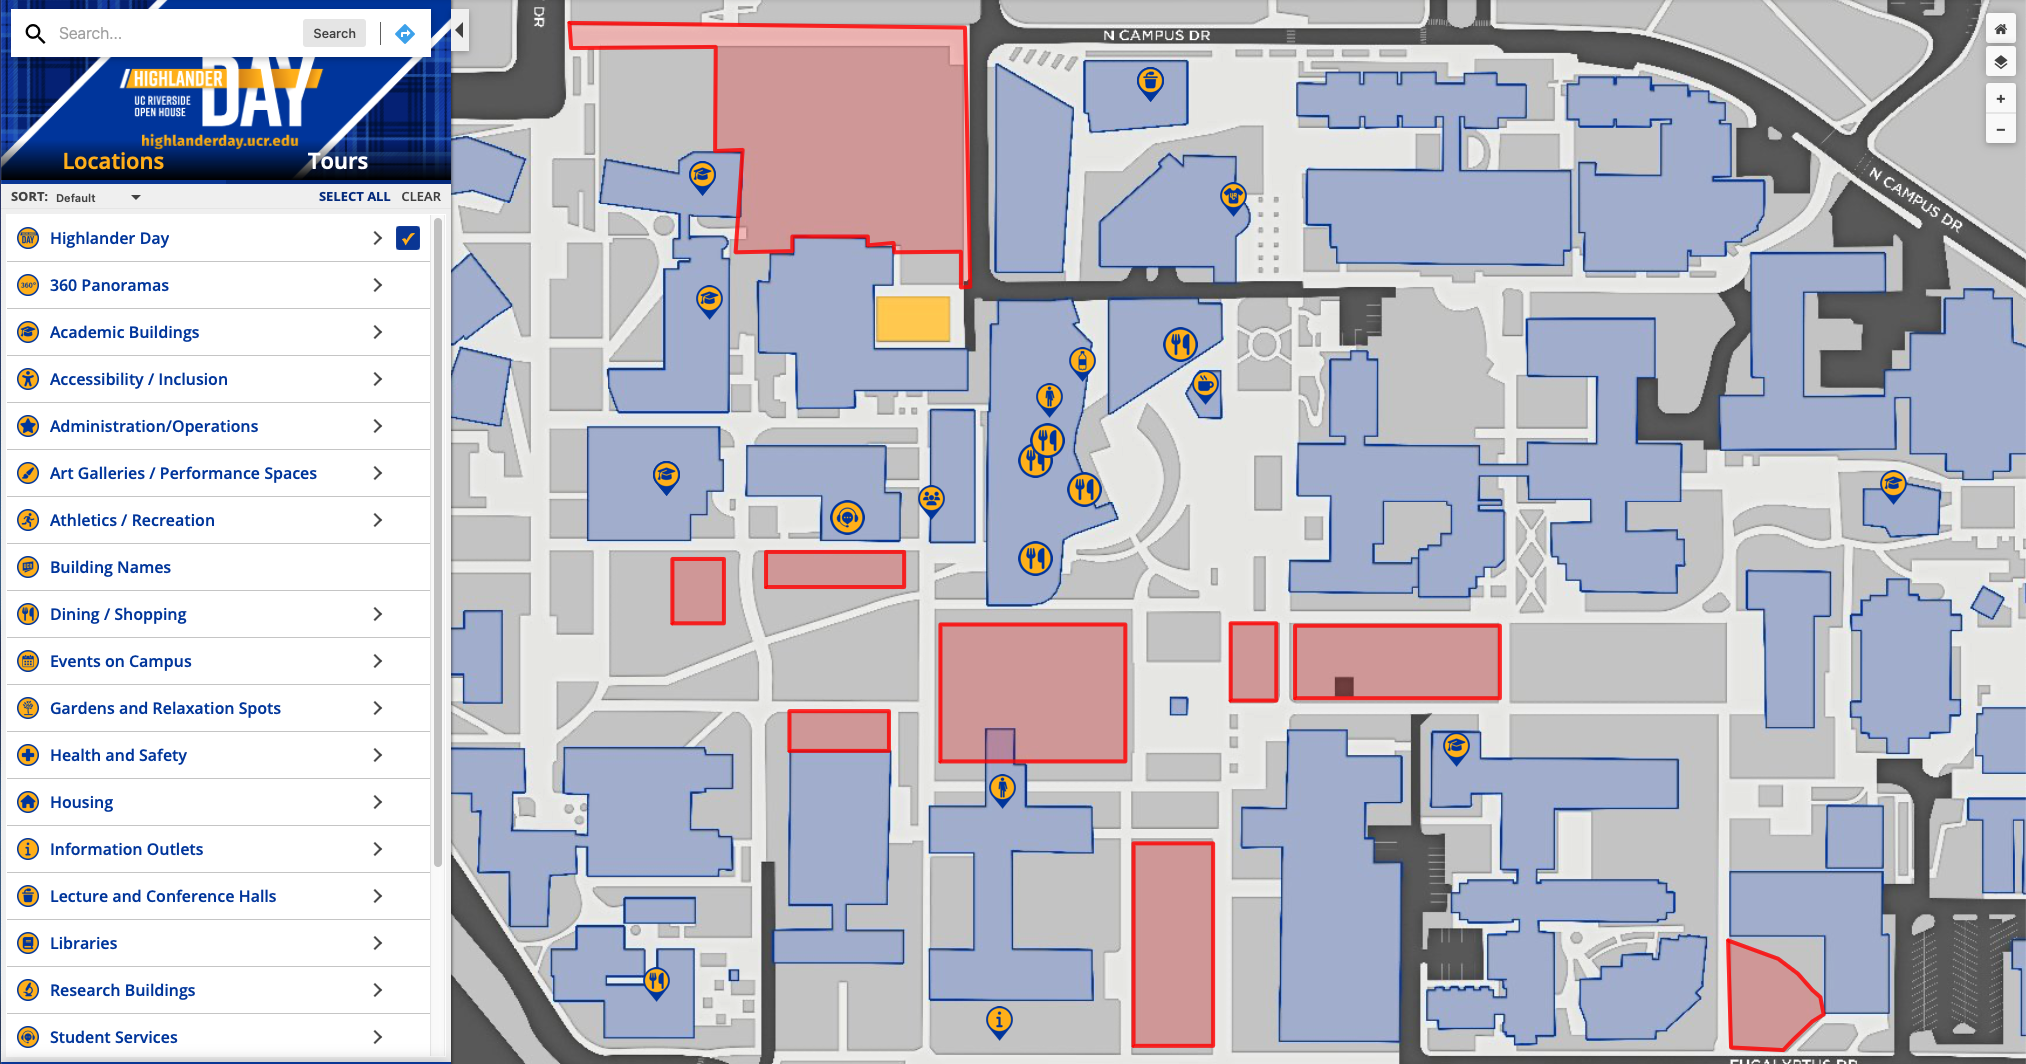 Screenshot of the UC Riverside campus map. The left side has a navigation panel while the right displays various buildings and locations on the UCR Campus.